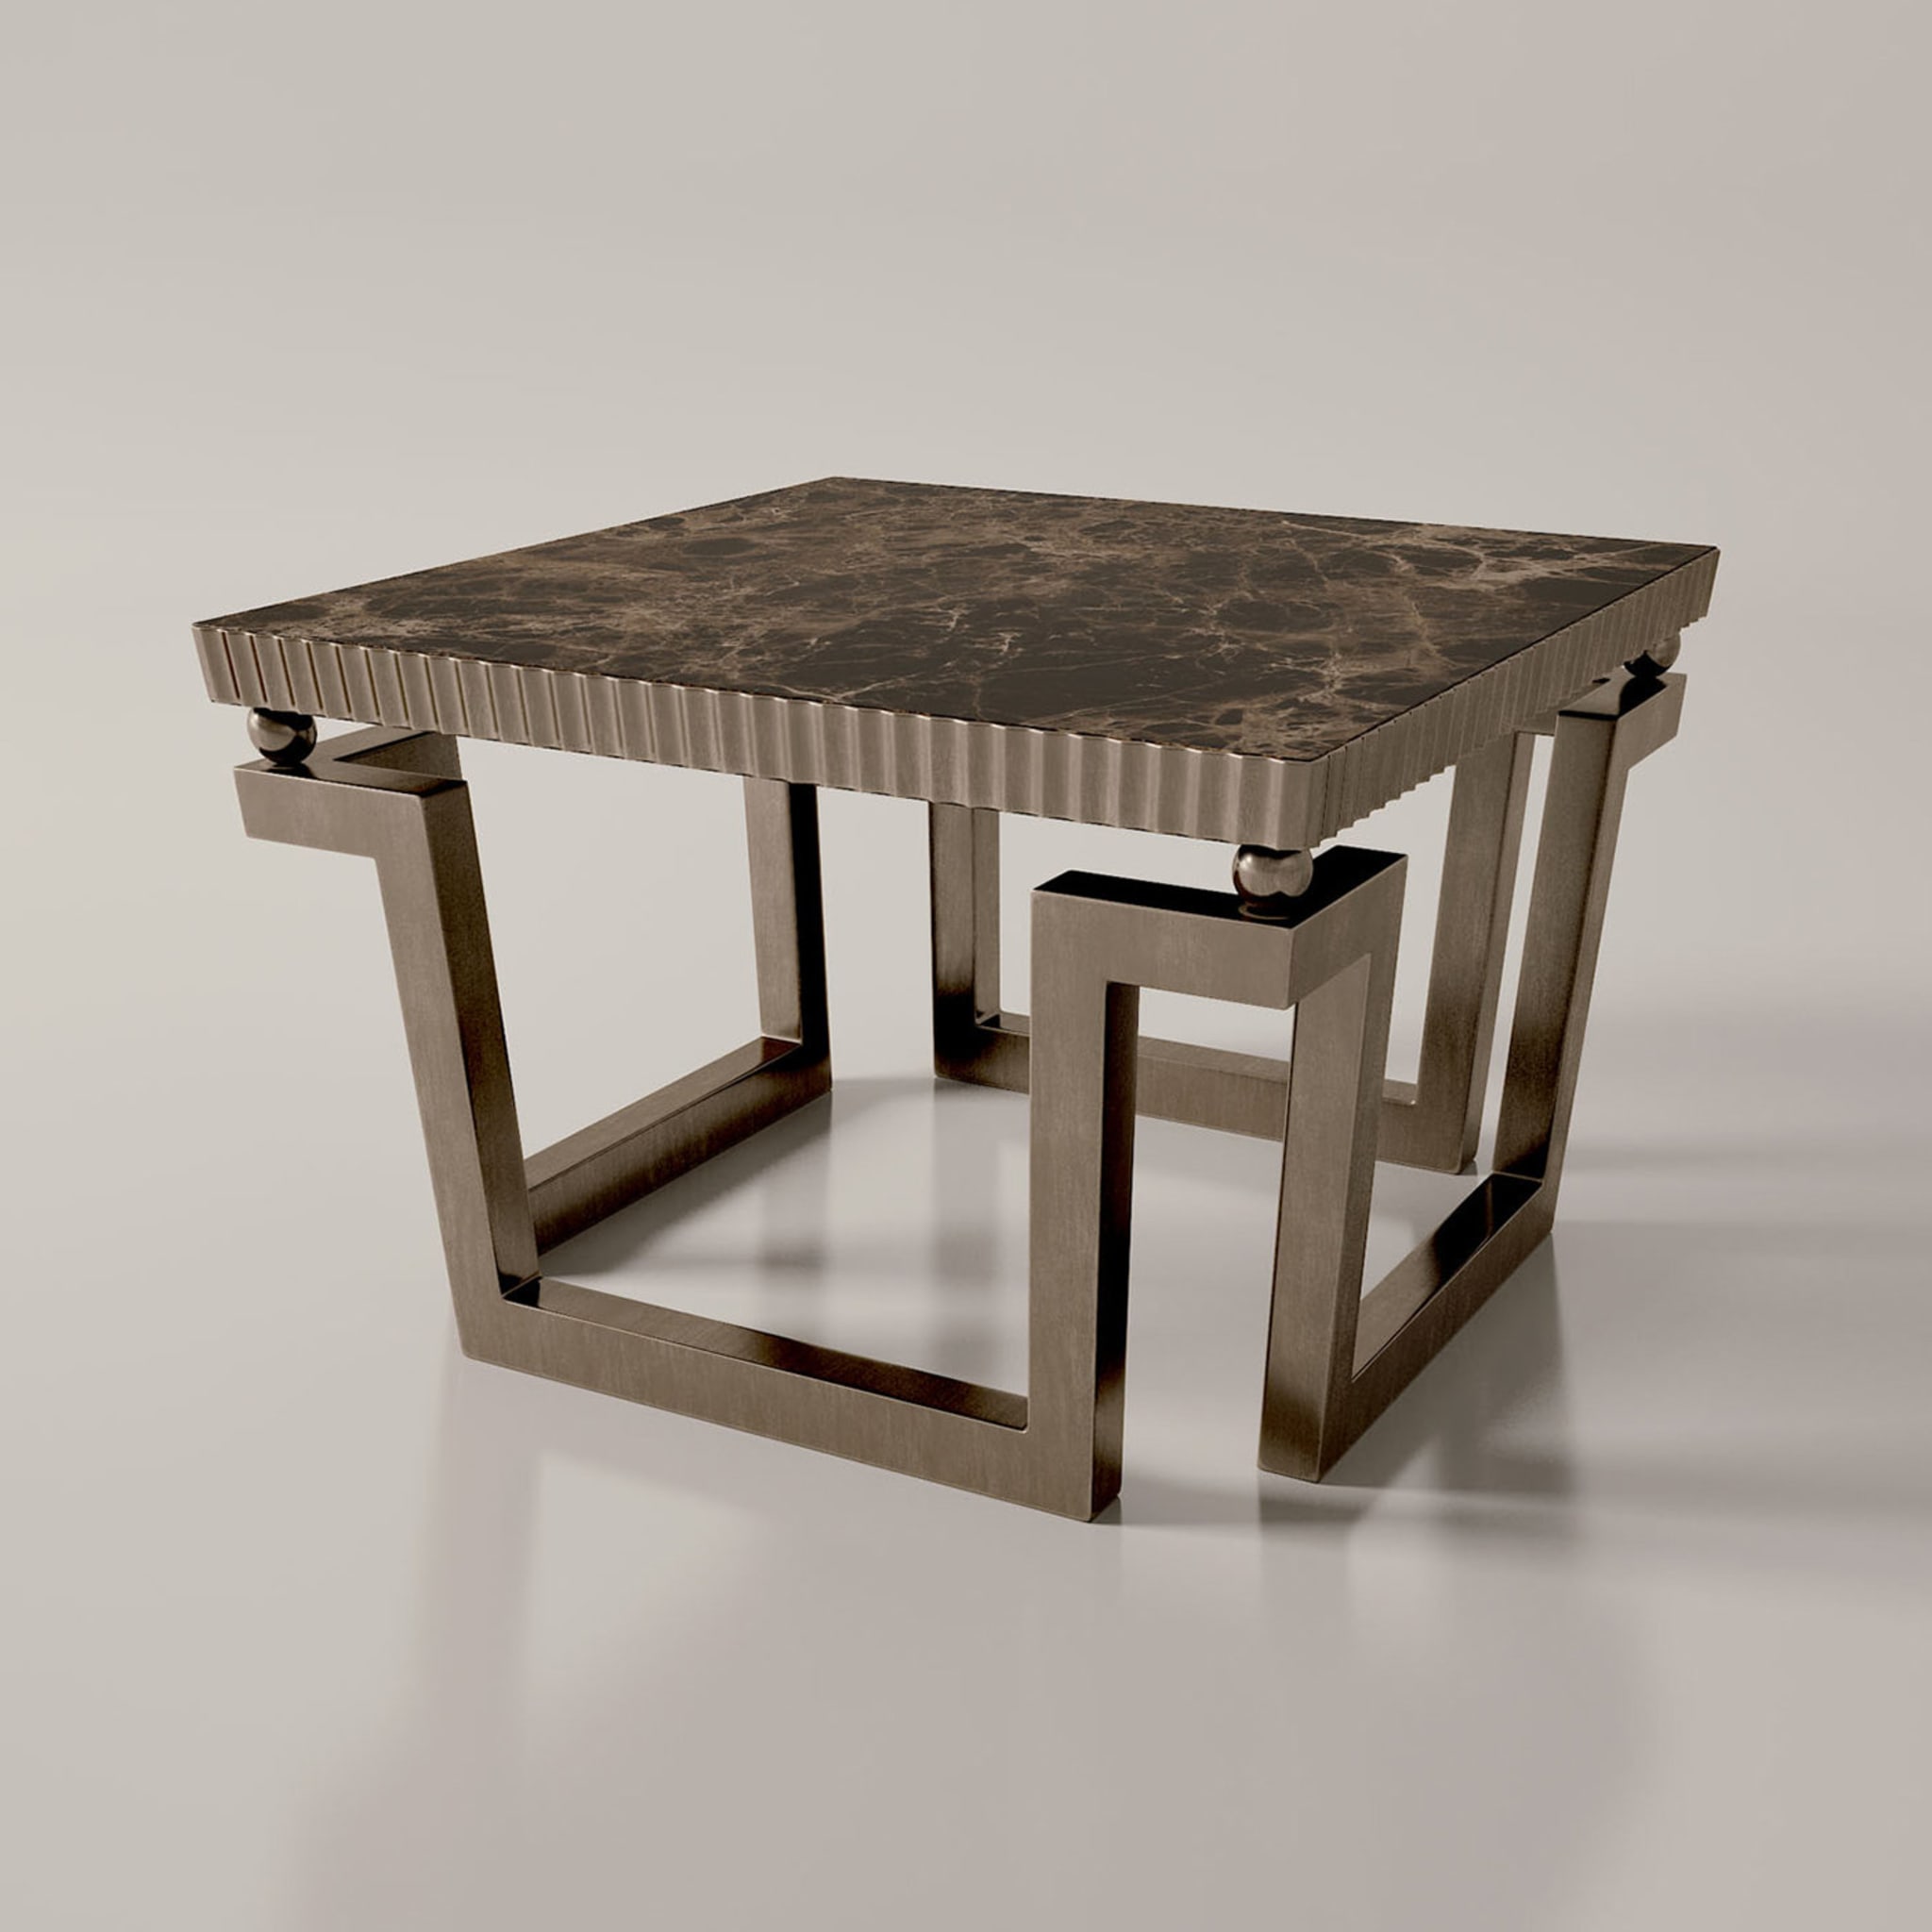 Kubo Side Table - Alternative view 1